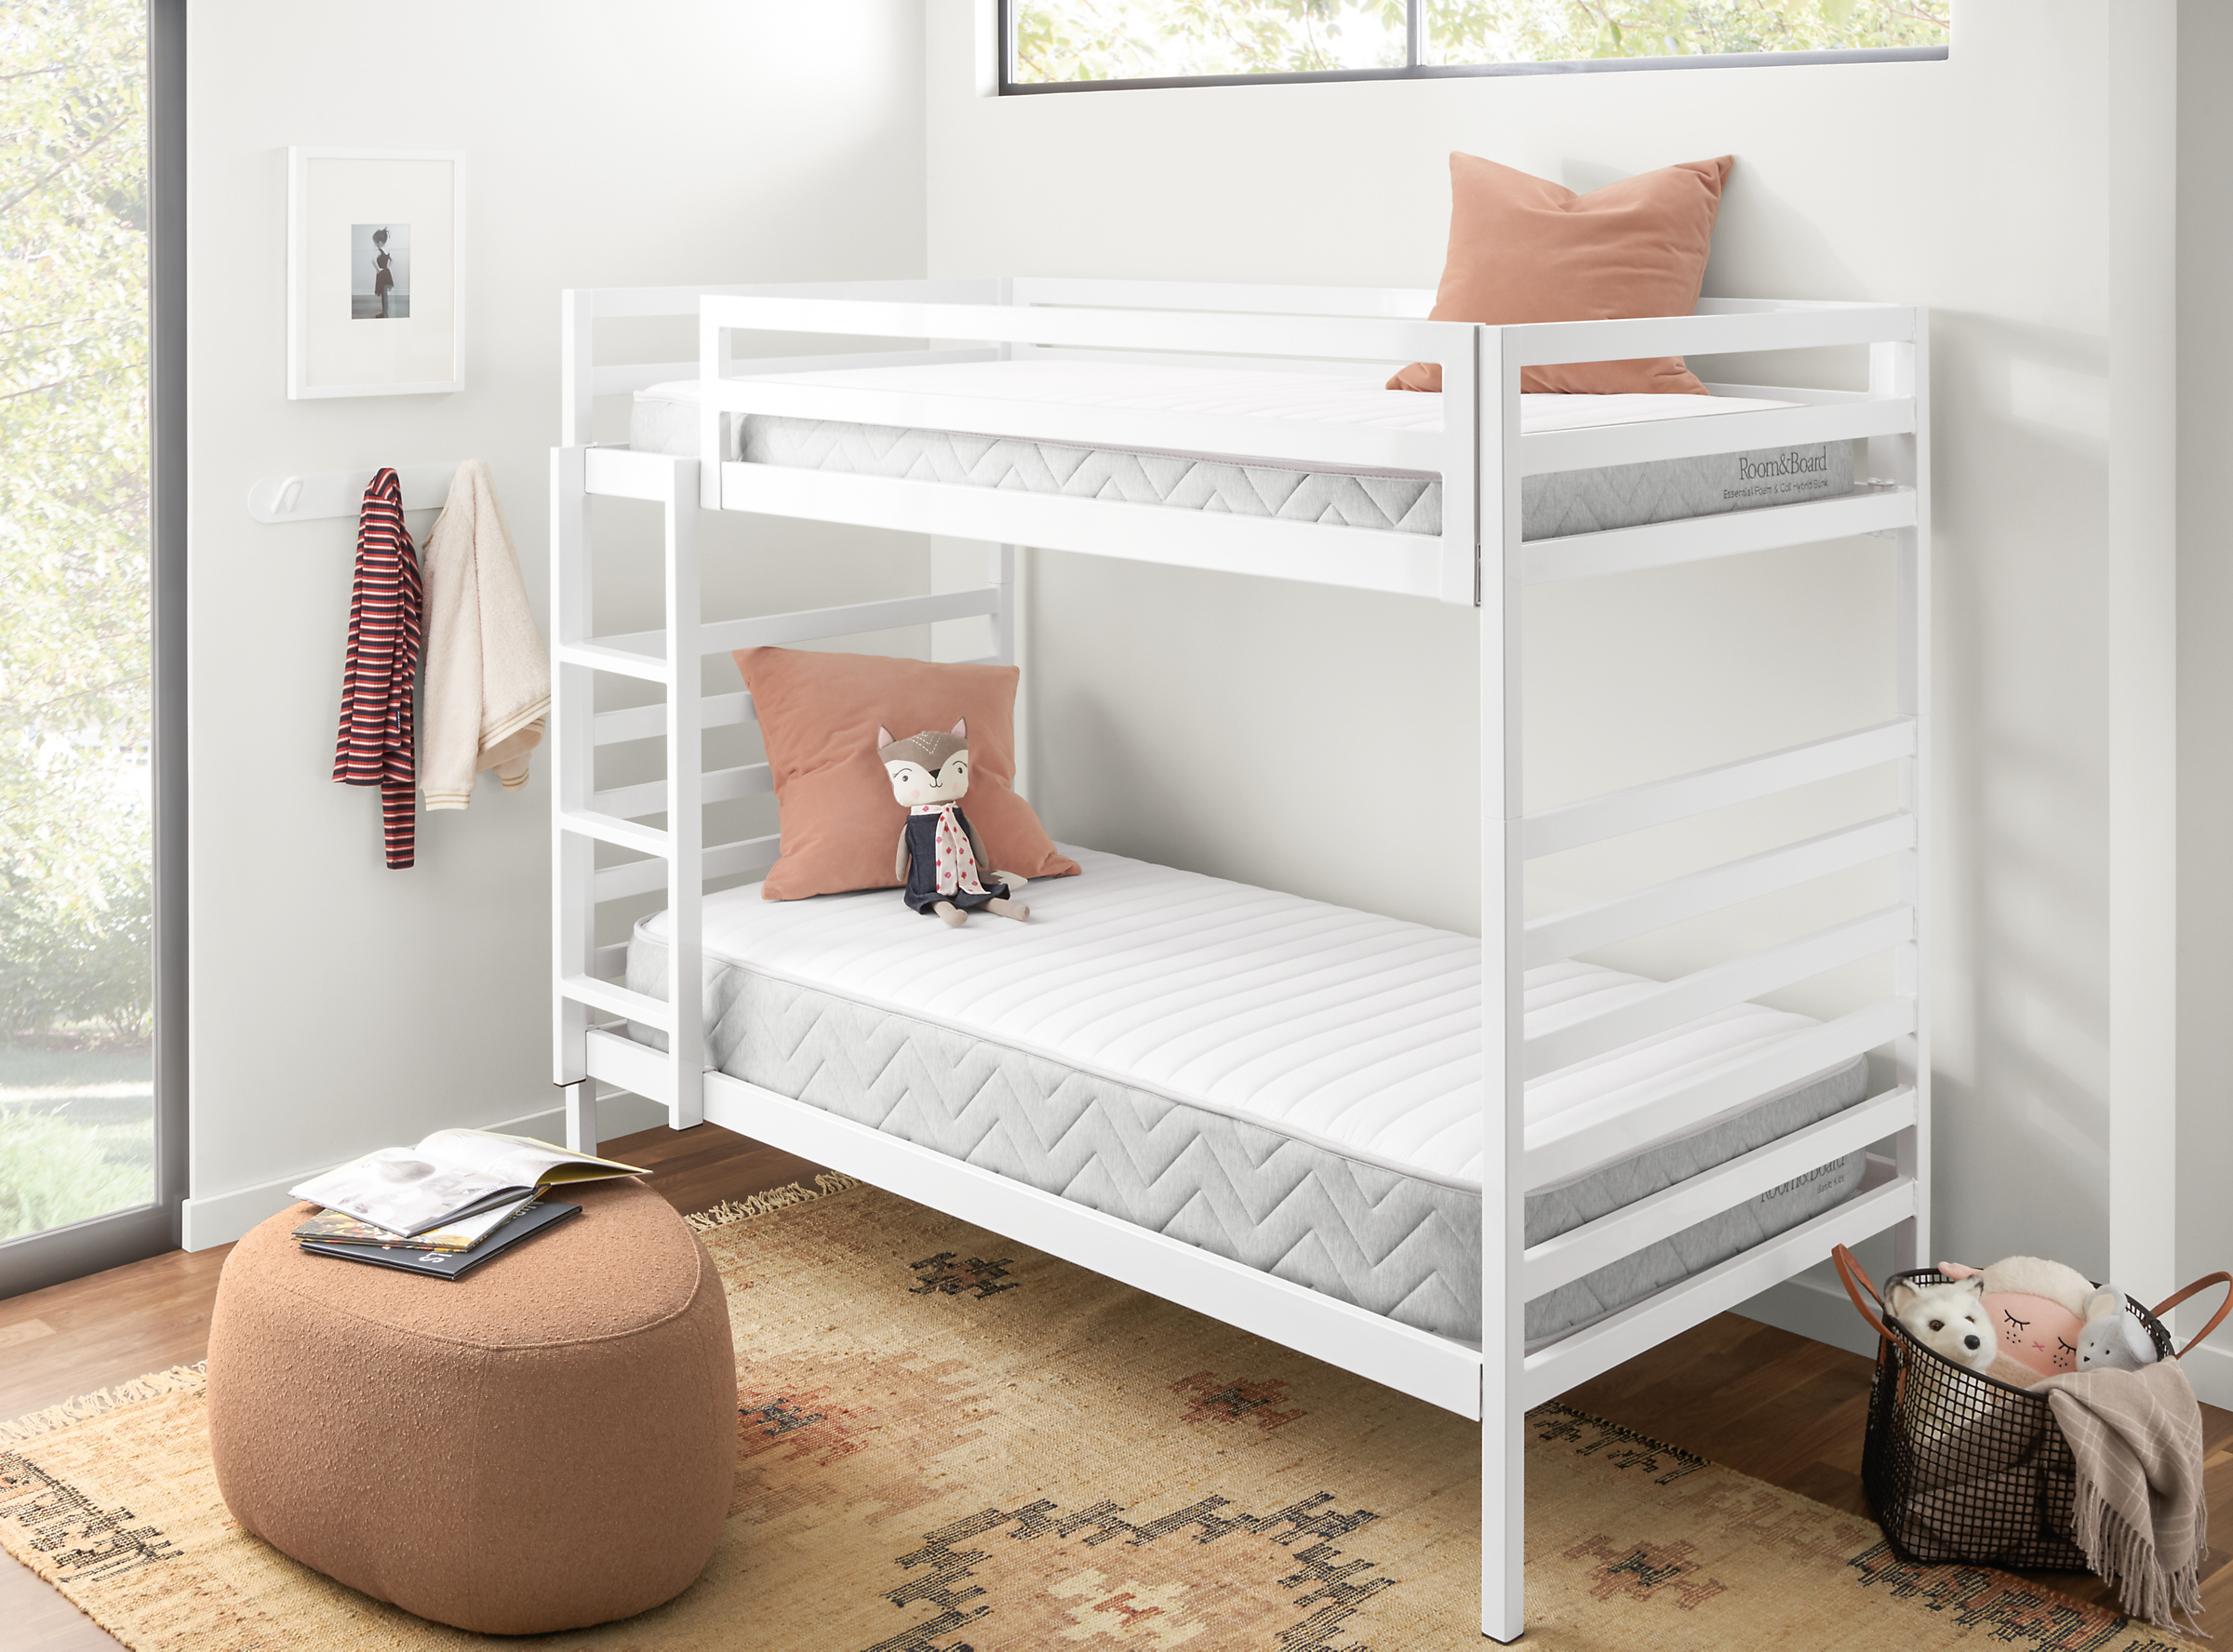 Detail of Essential bunk mattress and Basic twin mattress on bunk bed.